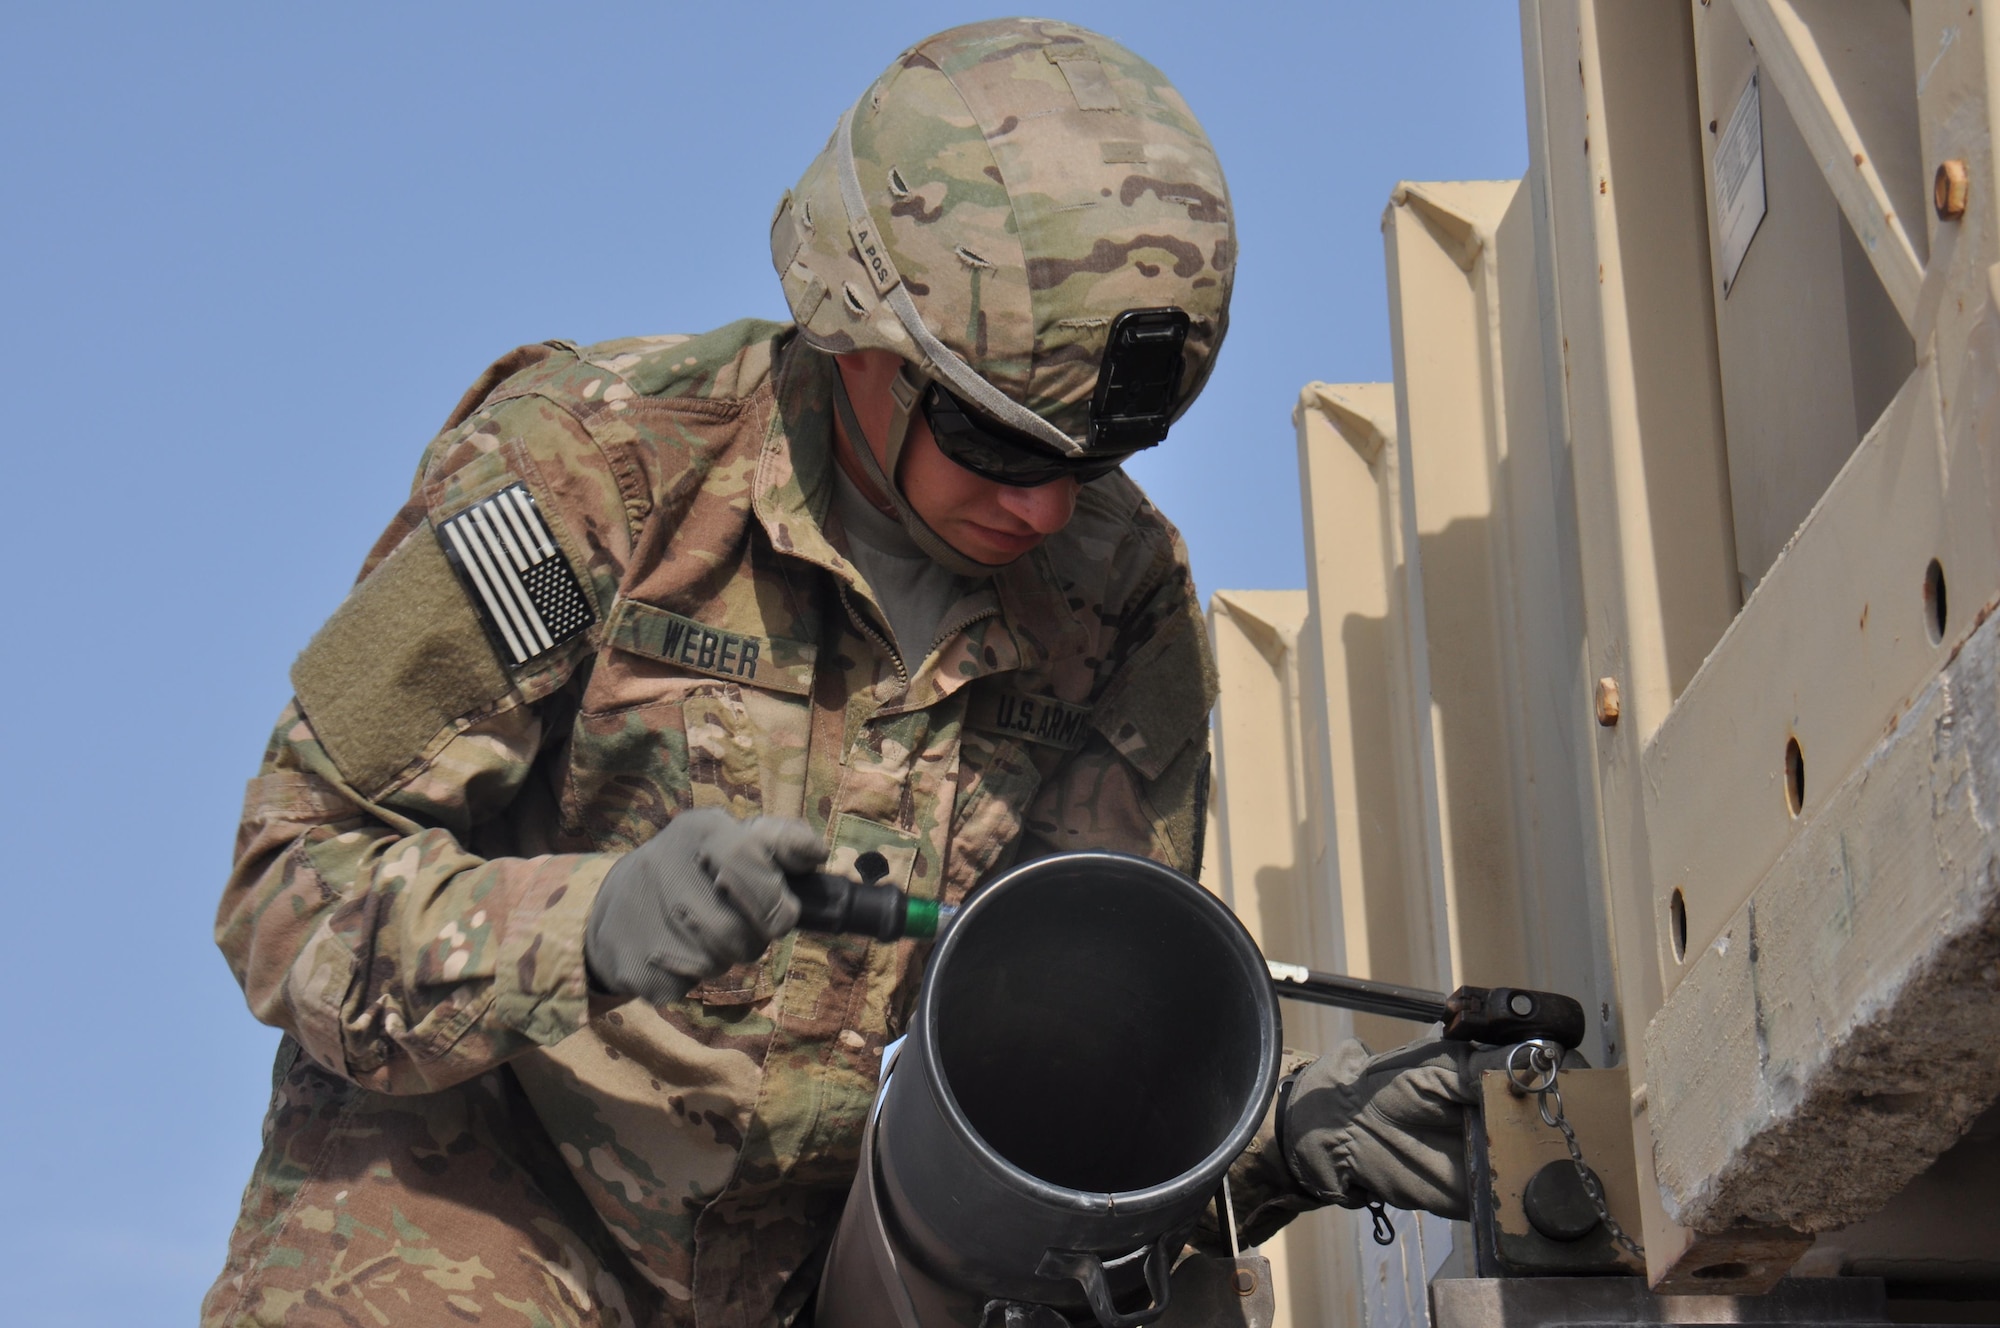 Pfc. Kelson Weber, 1-62 Delta Battery Air Defense Artillery Regiment Patriot station launcher operator and maintainer from Waukesha, Wisconsin, torques bolts in preparation for offloading a PAC-2 missile canister during a training exercise at Al Udeid Air Base, Qatar Mar. 4. The Patriot missiles at AUAB protect the base from a variety of airborne threats including tactical ballistic missiles and drones.  (U.S. Air Force photo by Tech. Sgt. James Hodgman/Released)